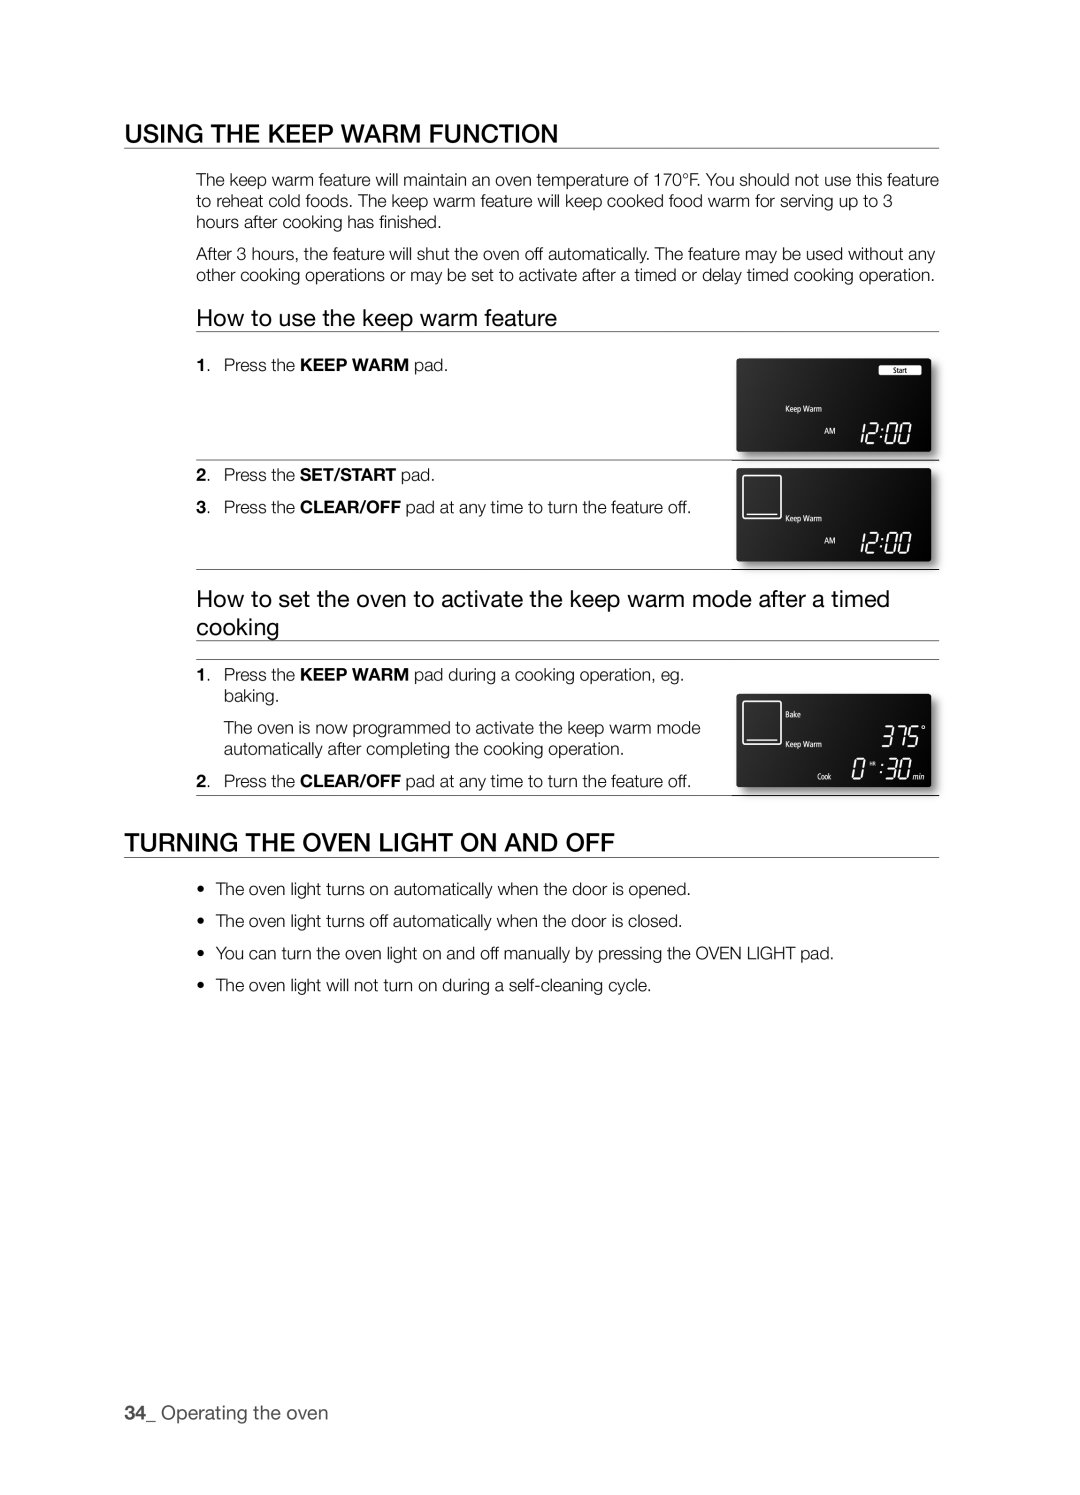 Samsung FTQ386LWX Using The Keep Warm Function, Turning The Oven Light On And Off, How to use the keep warm feature 